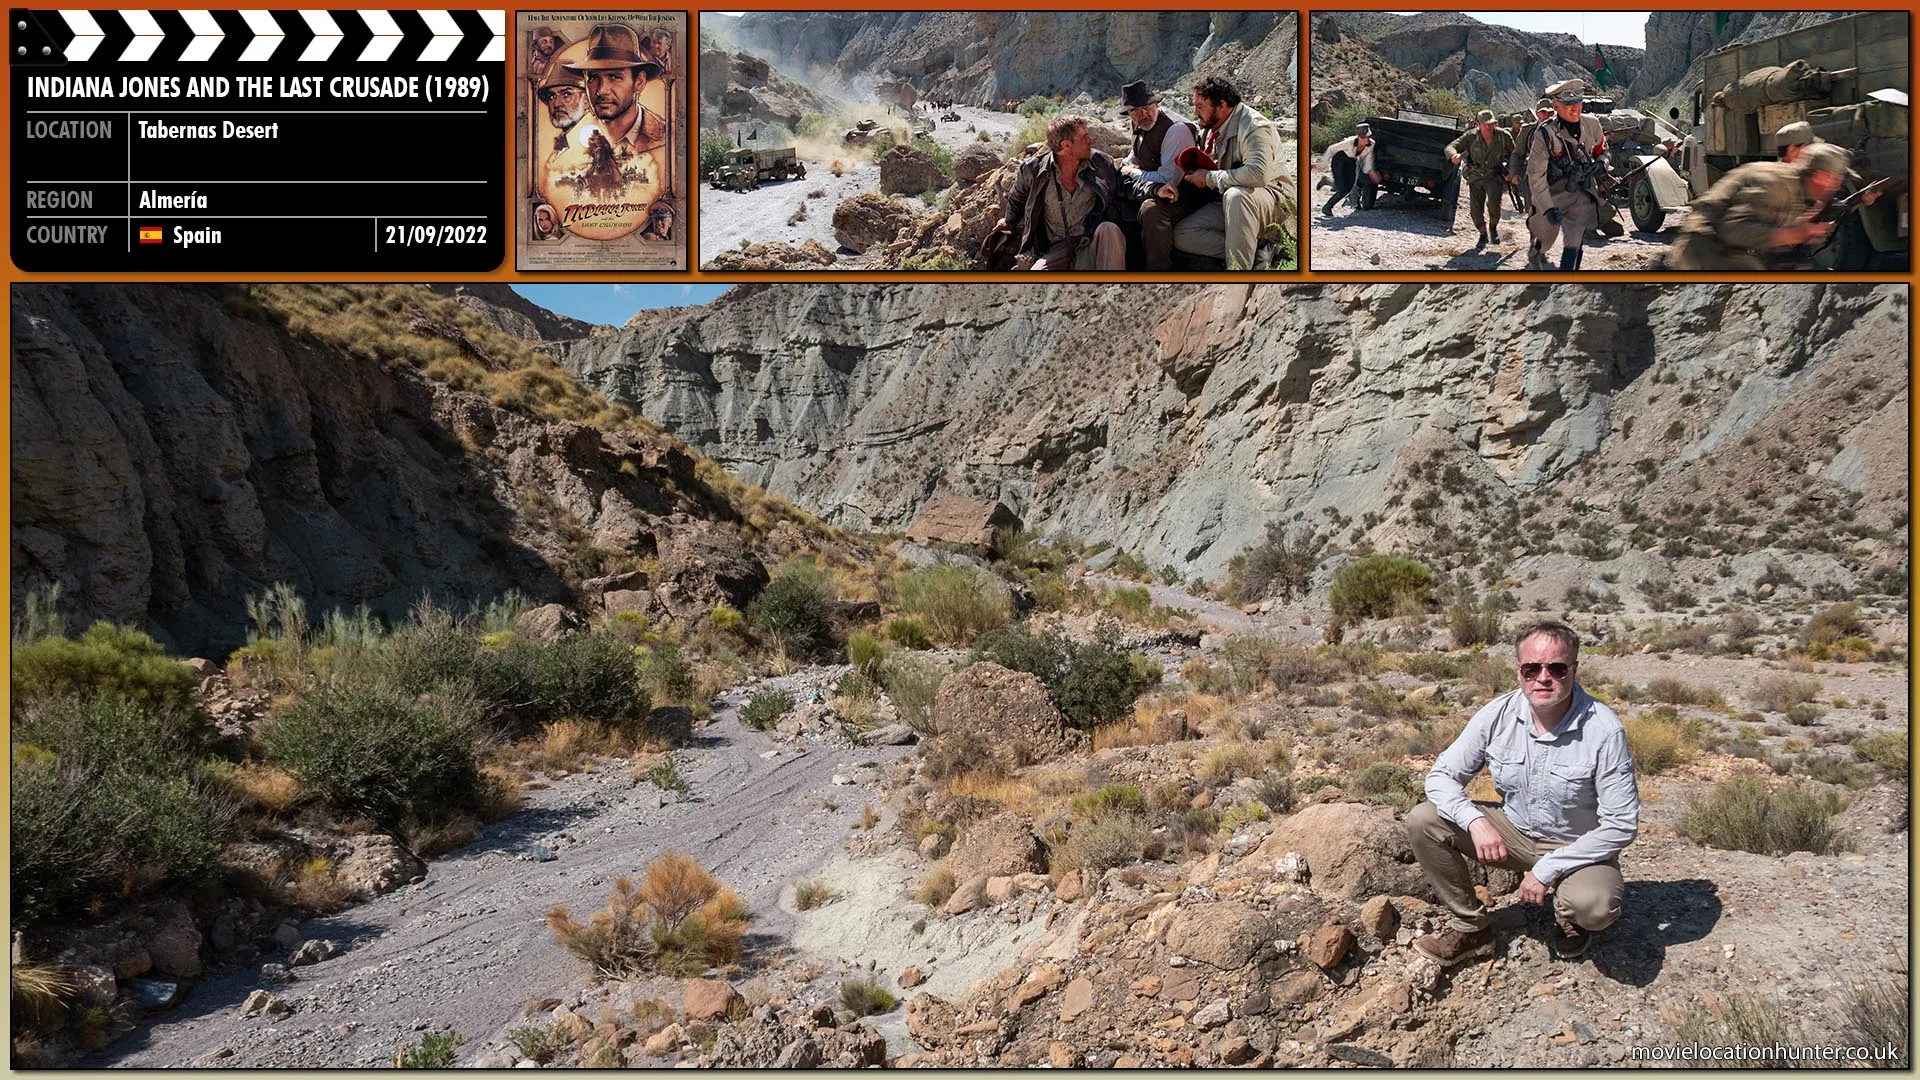 Filming location photo, shot in Spain, for Indiana Jones and the Last Crusade (1989). Scene description: Indy (Harrison Ford) finds Donovan's (Julian Glover) party travelling through the valley below and is surprised to see they have a tank.  A concerned Henry (Sean Connery) forcefully suggests Indy get out of the way to which he smugly replies they are well out of rage. At that moment the tank fires a shell in their direction and Indy runs for cover.